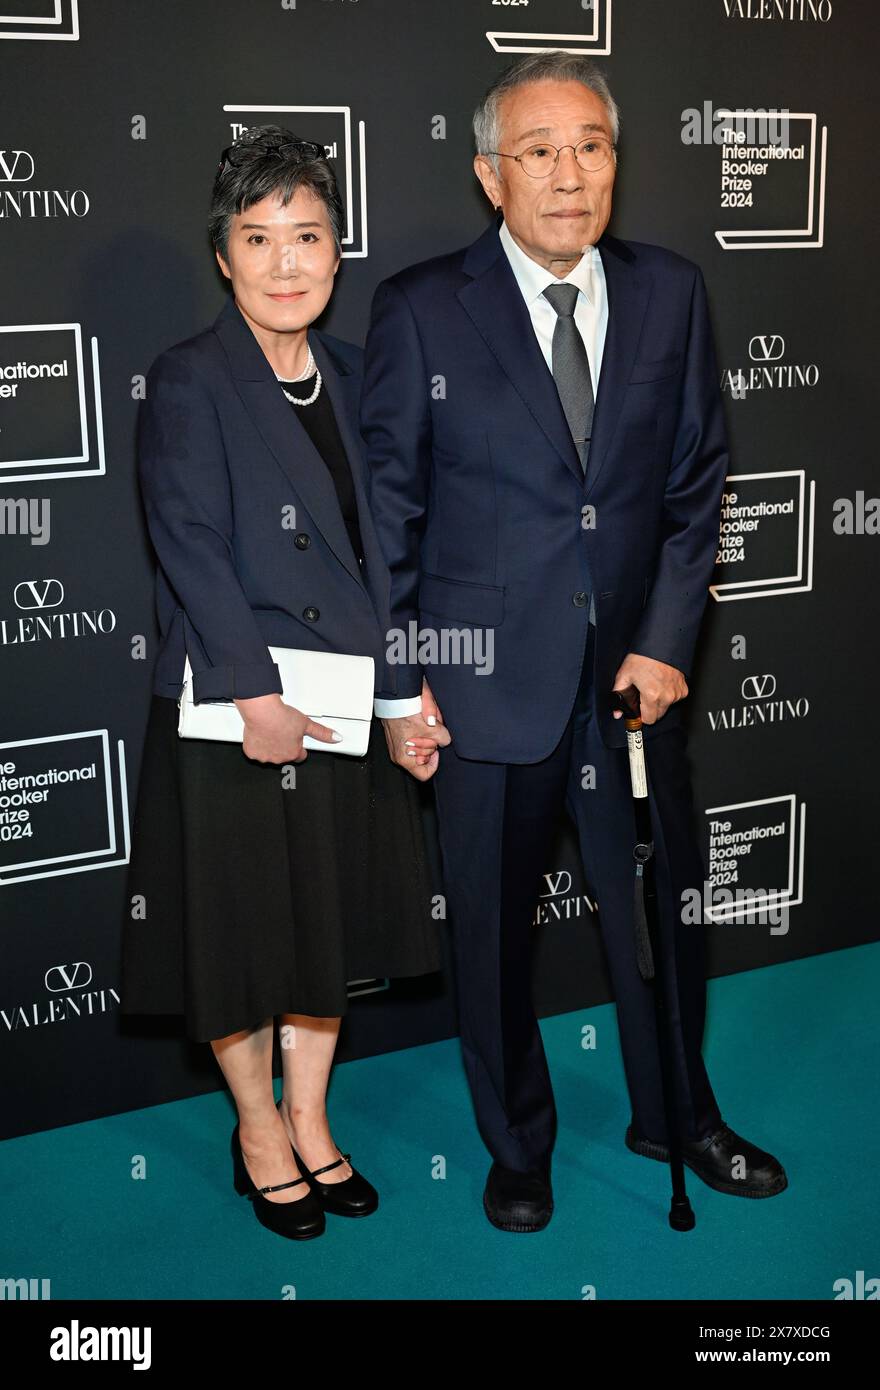 LONDON, ENGLAND - MAY 21 2024: Author Hwang Sok-yong (R) and guest with the shortlisted book 'Mater 2-10' attends The International Booker Prize 2024 announcement at Tate Modern in London, England. Credit: See Li/Picture Capital/Alamy Live News Stock Photo